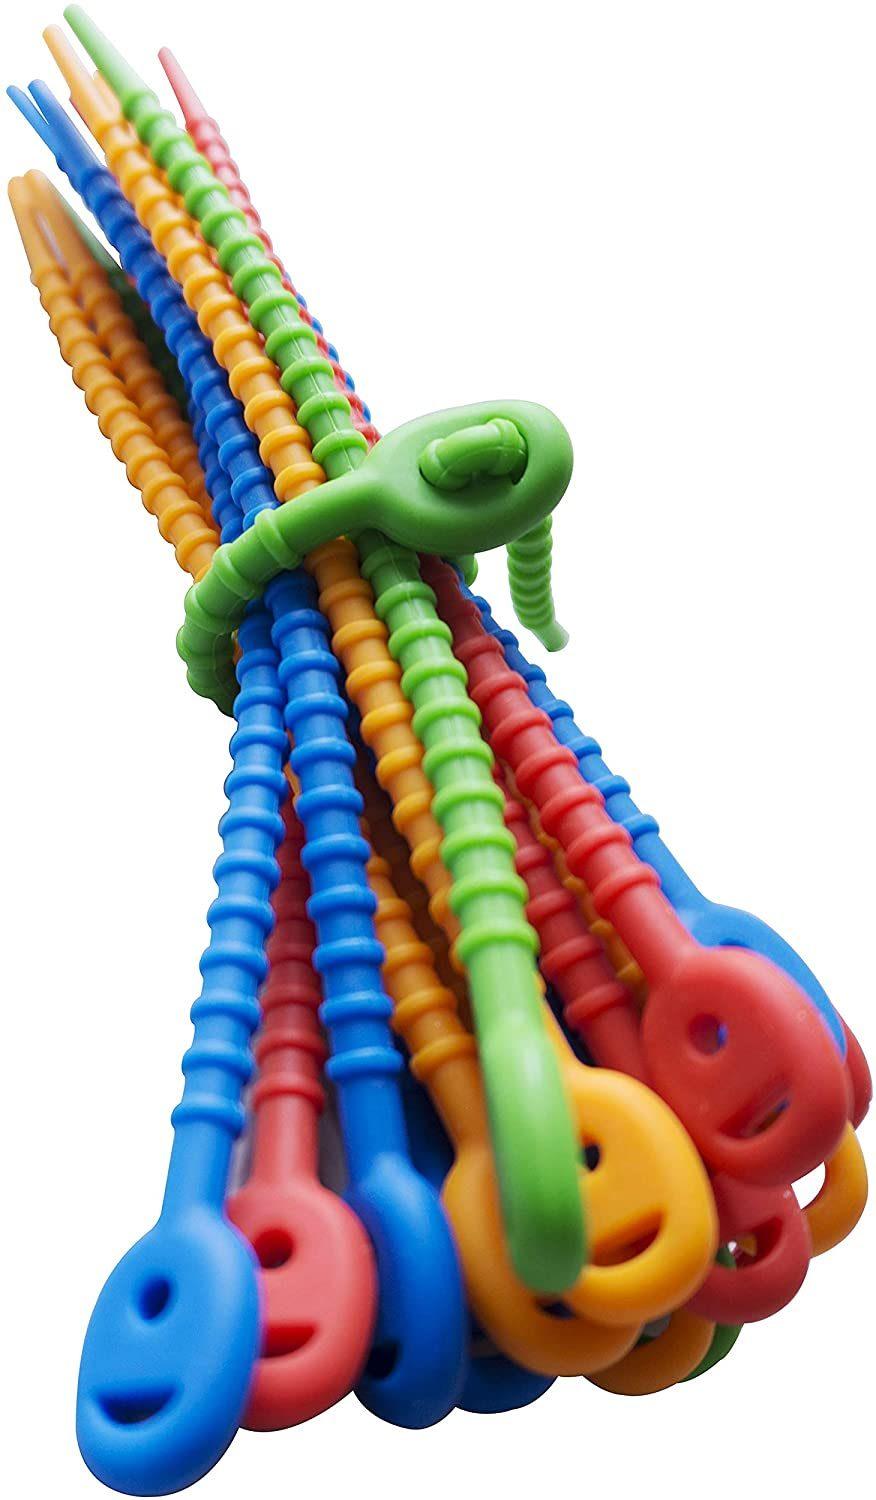 Colorful Silicone Ties Bag Clip Cable Straps Bread Tie Household Snake Ties